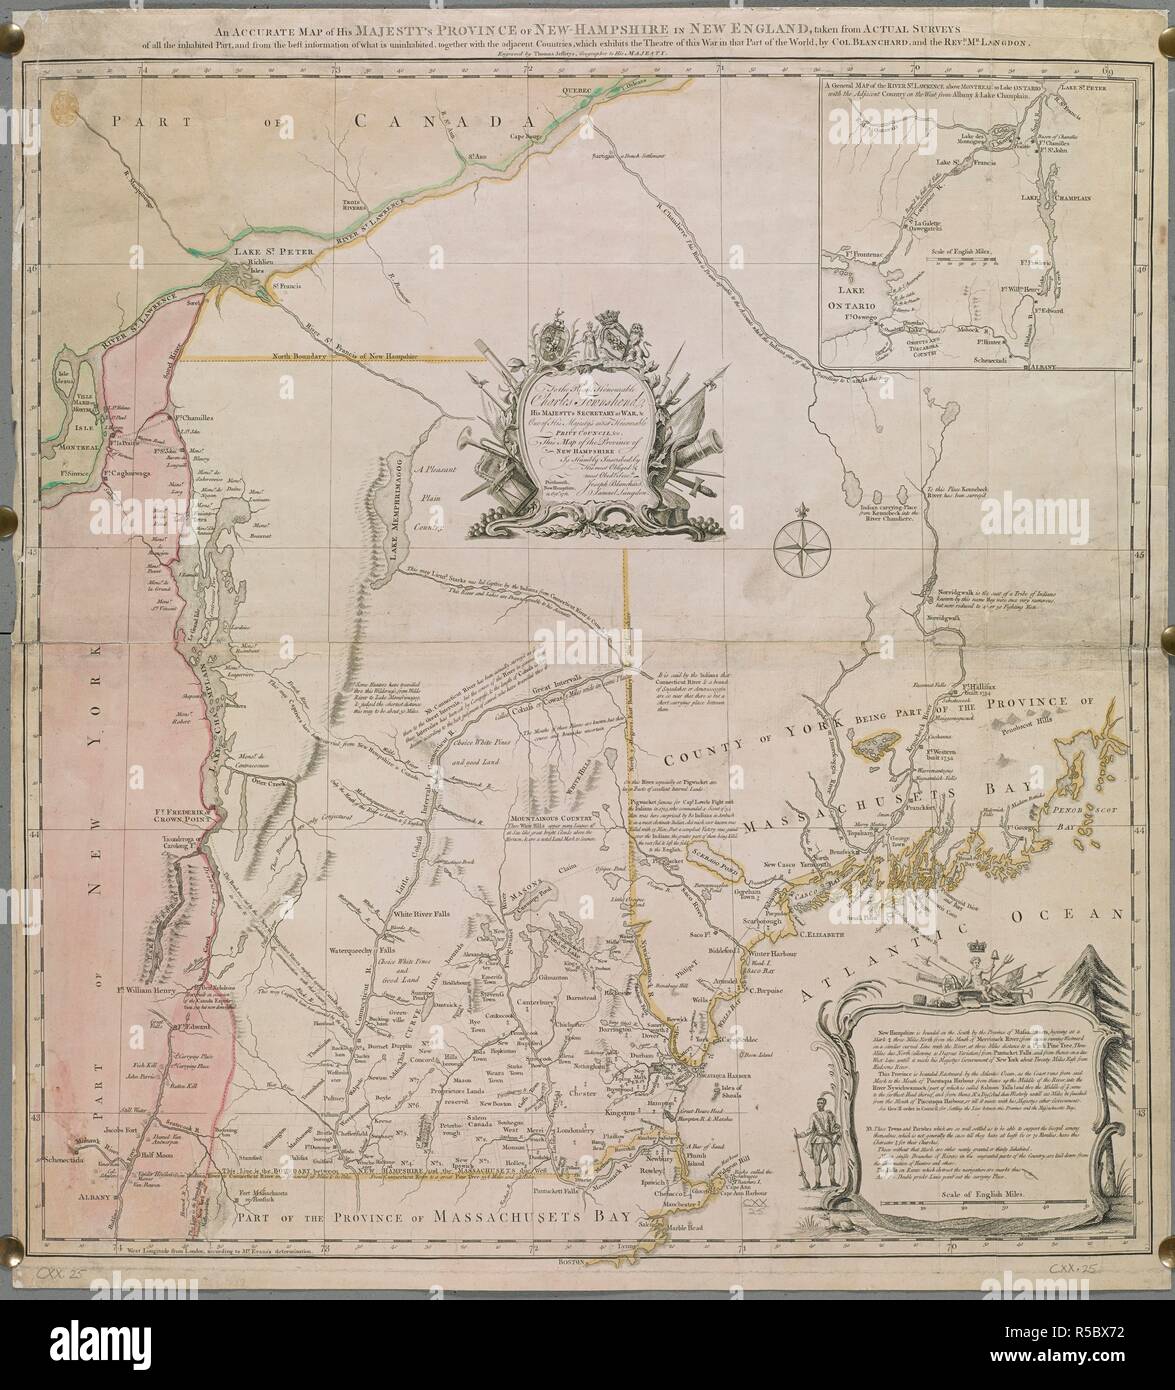 An Accurate Map of His Majesty's Province of New Hampshire in New England. [London] : [Thomas Jefferys], 21st. Octr. 1761. Source: Maps K.Top.120.25. Language: English. Stock Photo